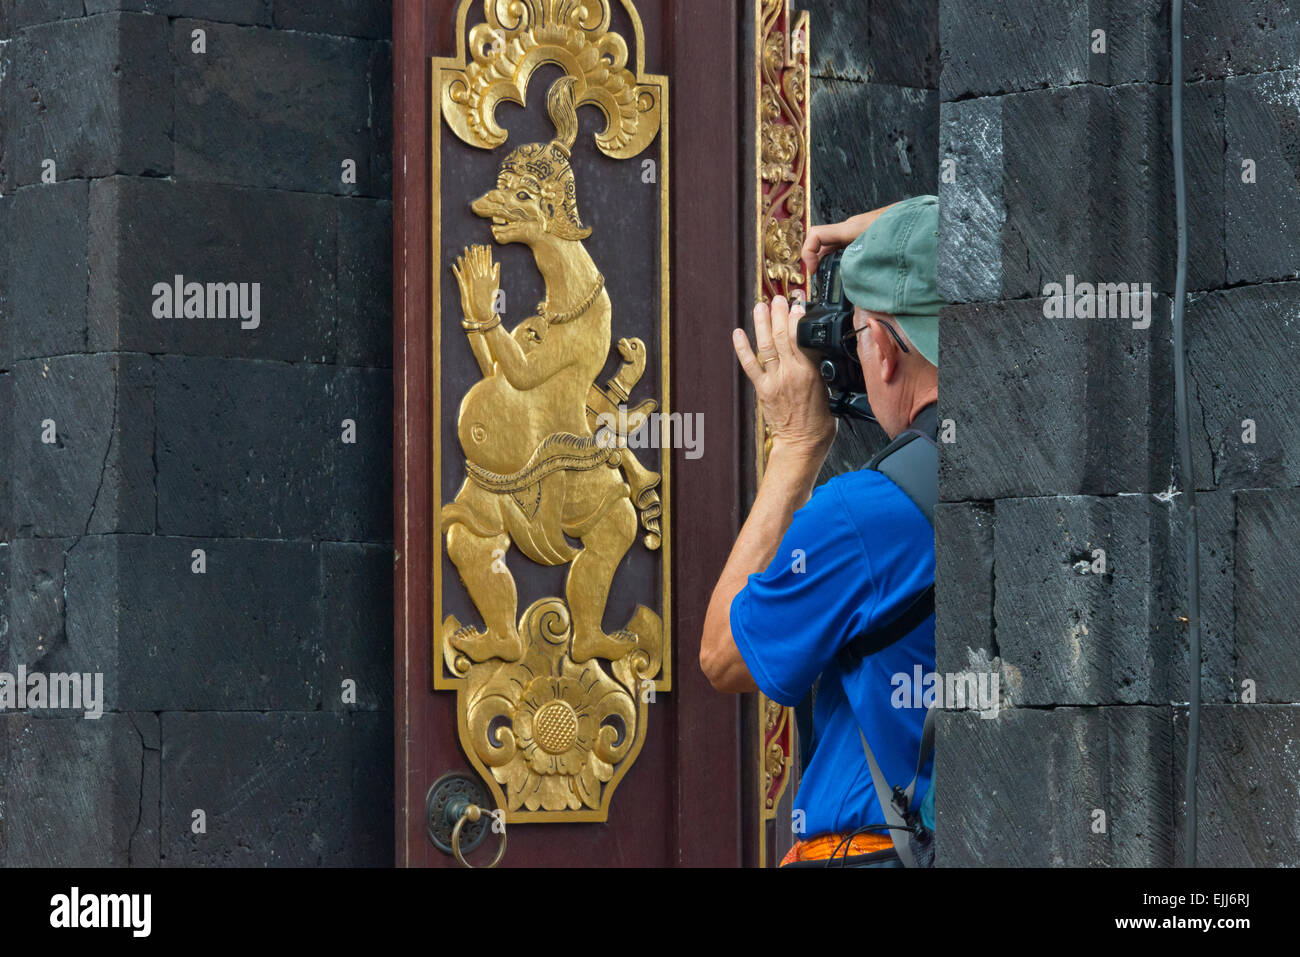 Tourist photographing decorated door in Mother Temple of Besakih, the most important, largest and holiest temple of Hindu religi Stock Photo